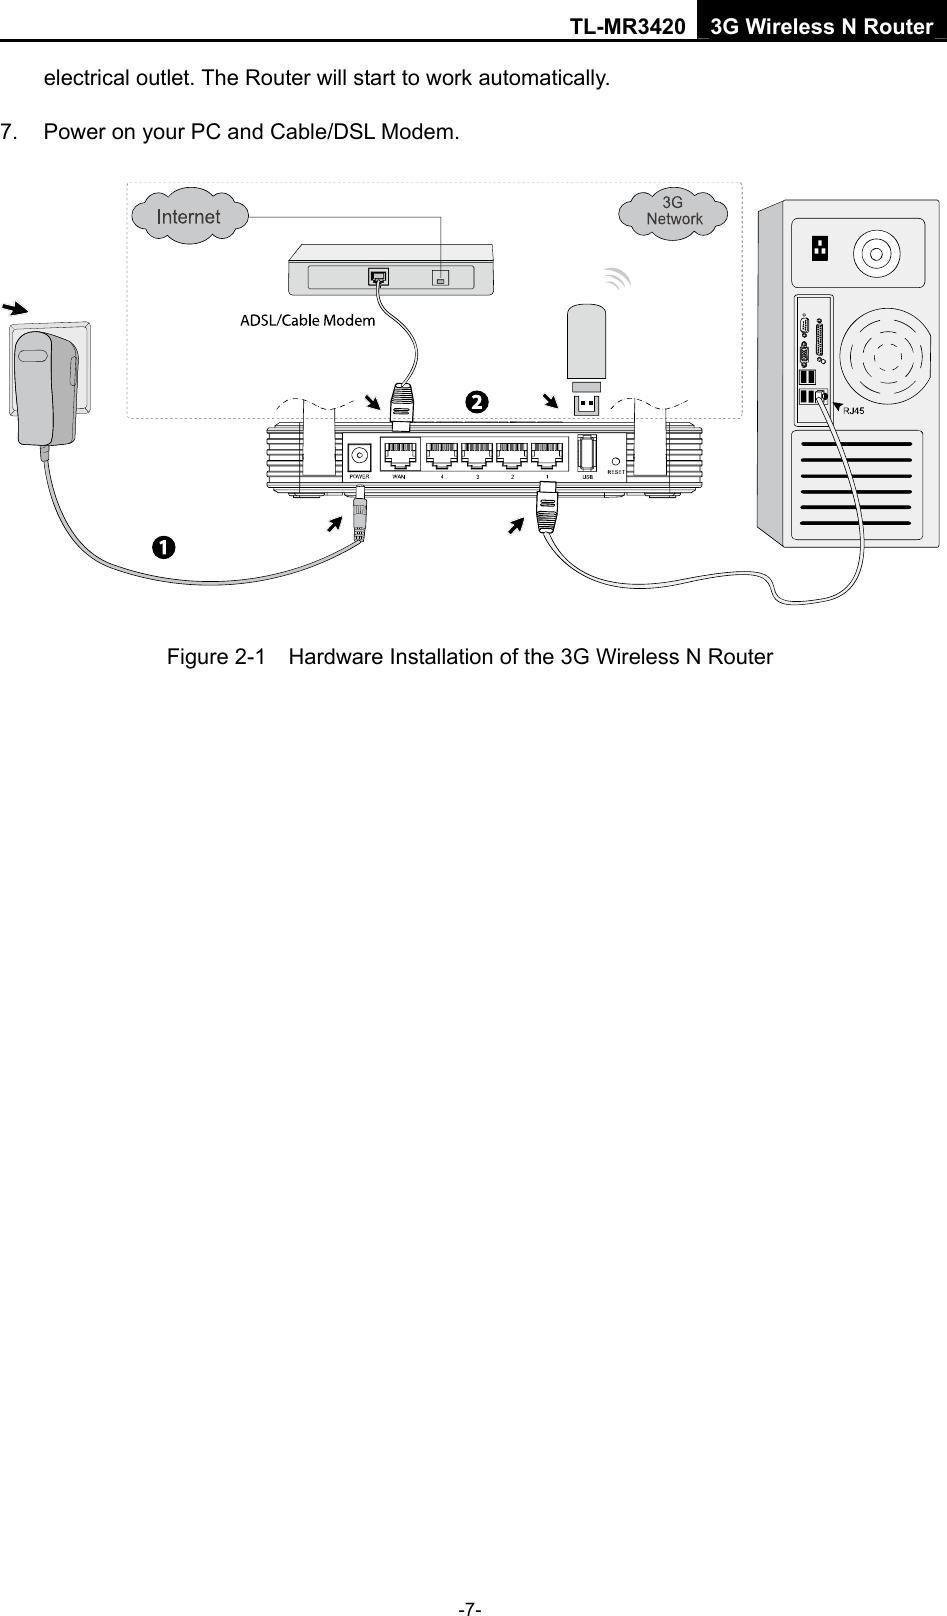 TL-MR3420 3G Wireless N Router -7- electrical outlet. The Router will start to work automatically. 7.  Power on your PC and Cable/DSL Modem.  Figure 2-1    Hardware Installation of the 3G Wireless N Router 